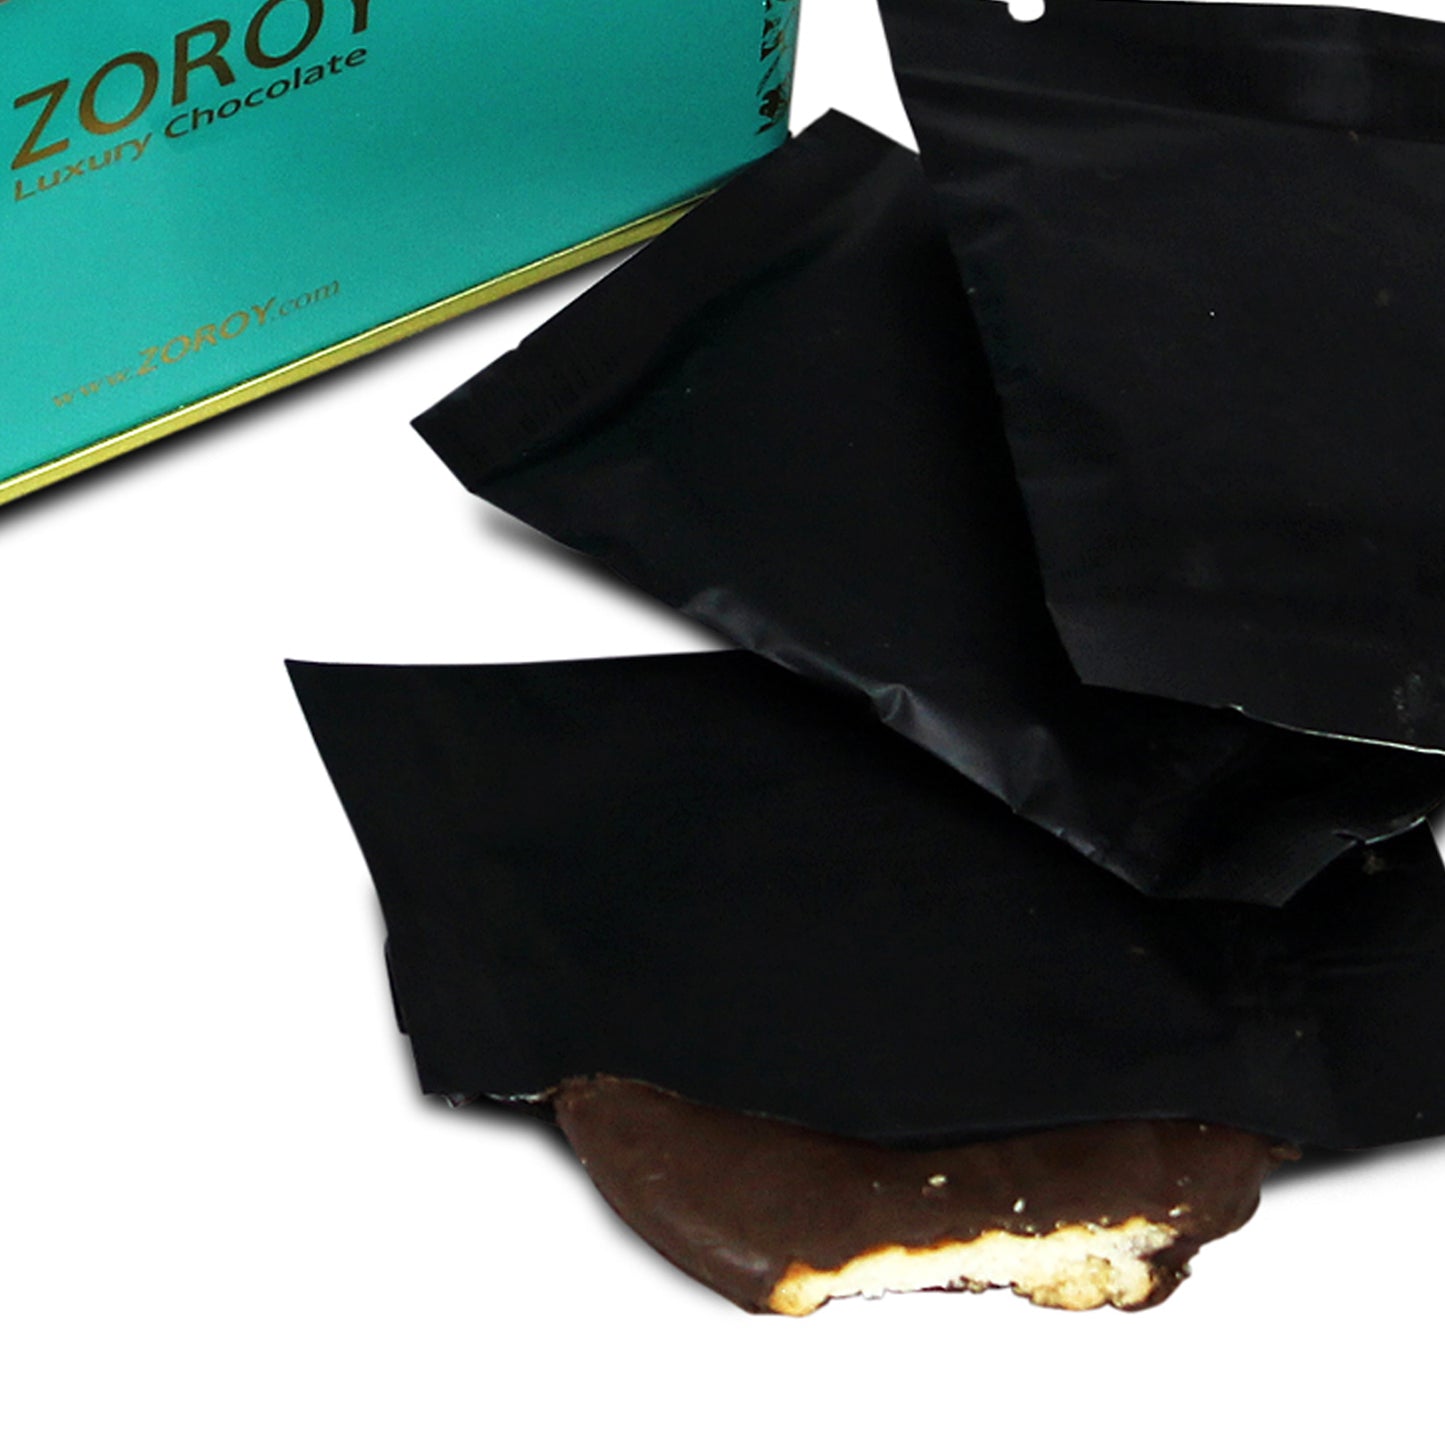 ZOROY LUXURY CHOCOLATE Everything Special Neel Gift Hamper | Tulsi Green Tea | Drinking Chocolate | Almond Buttercrunch | Cacao Almond Butter | Chocolate coated Biscuit | Coated Nuts | Dehydrated fruit